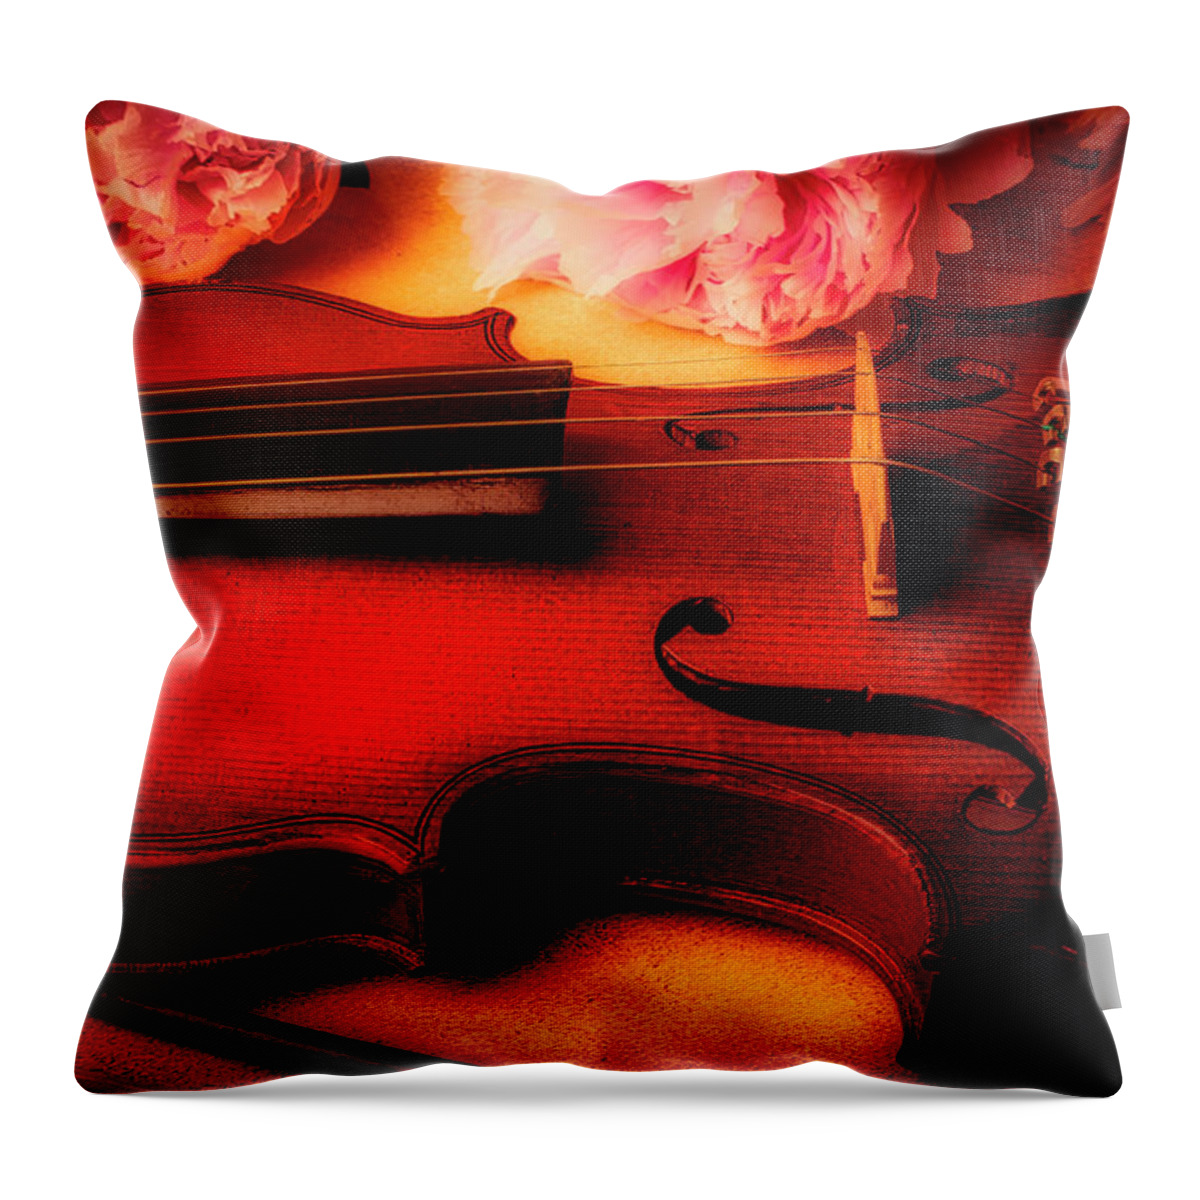 Pink Throw Pillow featuring the photograph Moody Violin With Peonies by Garry Gay